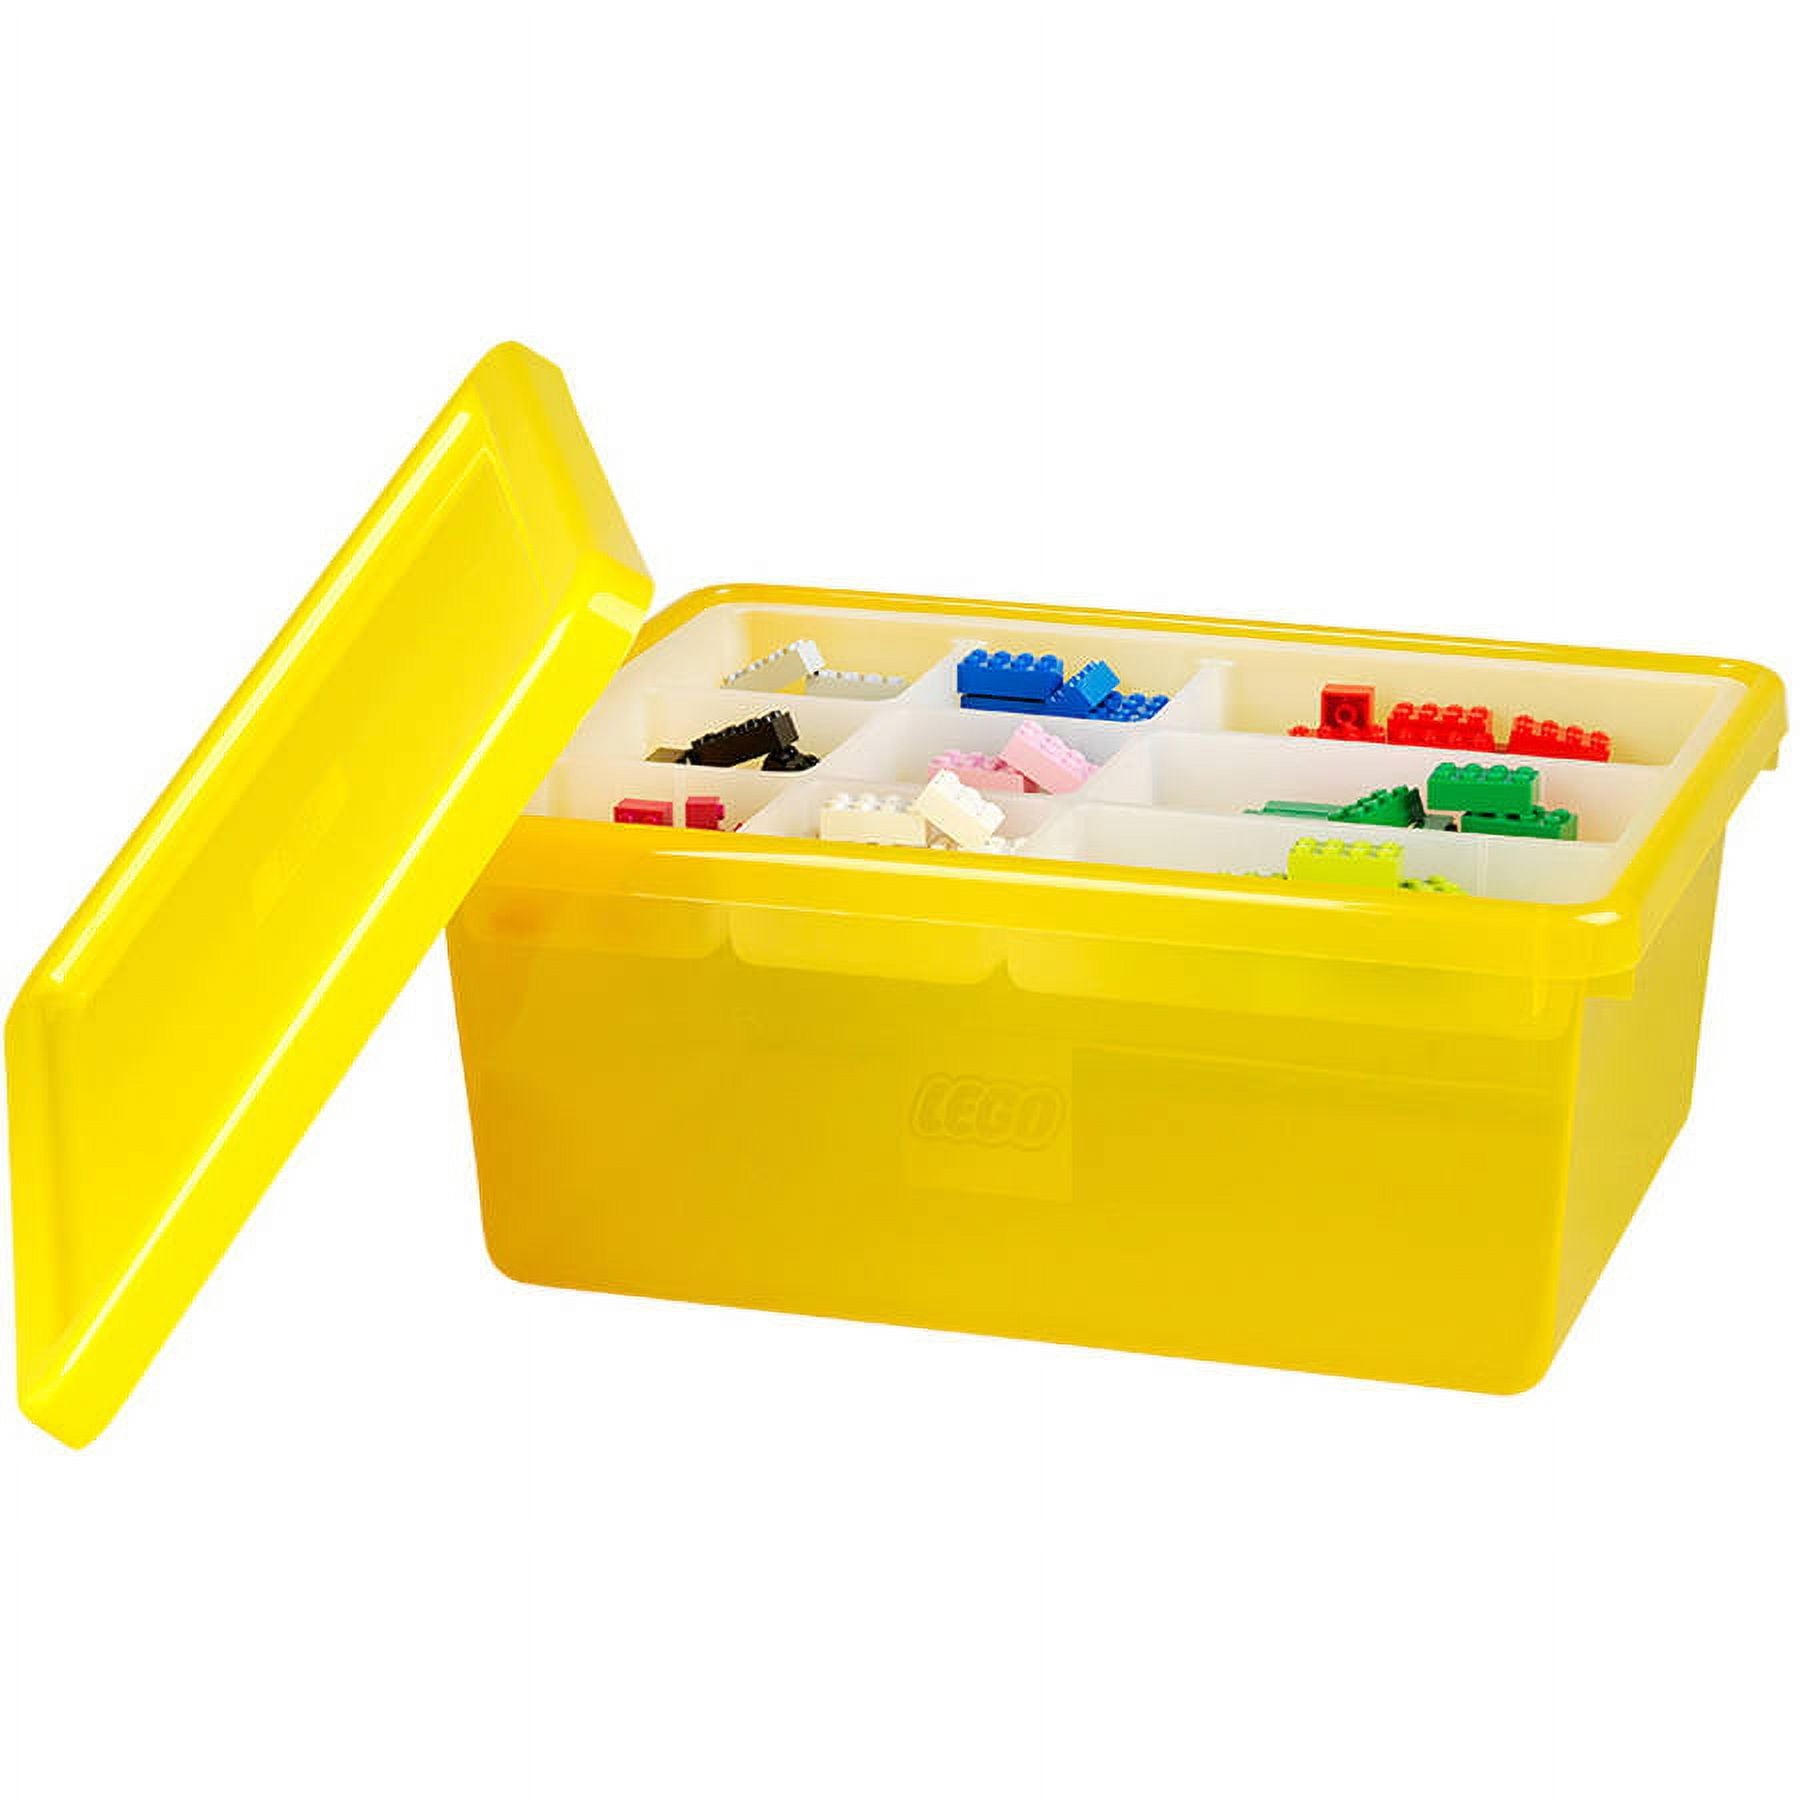 Superb Quality lego storage tool box With Luring Discounts